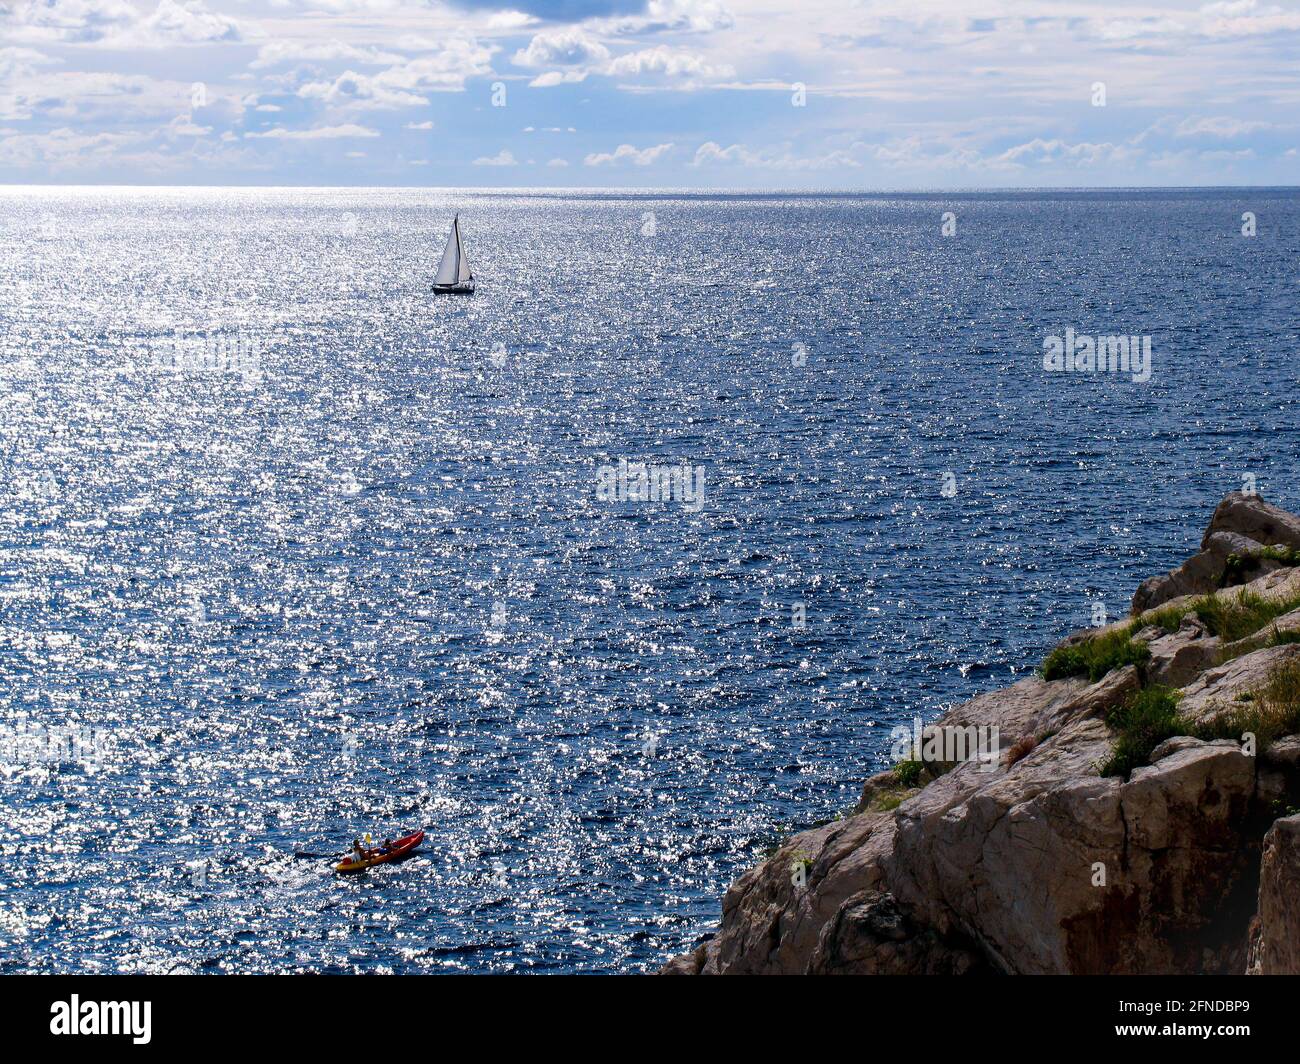 Amazing view of lonely yacht at open sea. Top view from cliff. Stock Photo